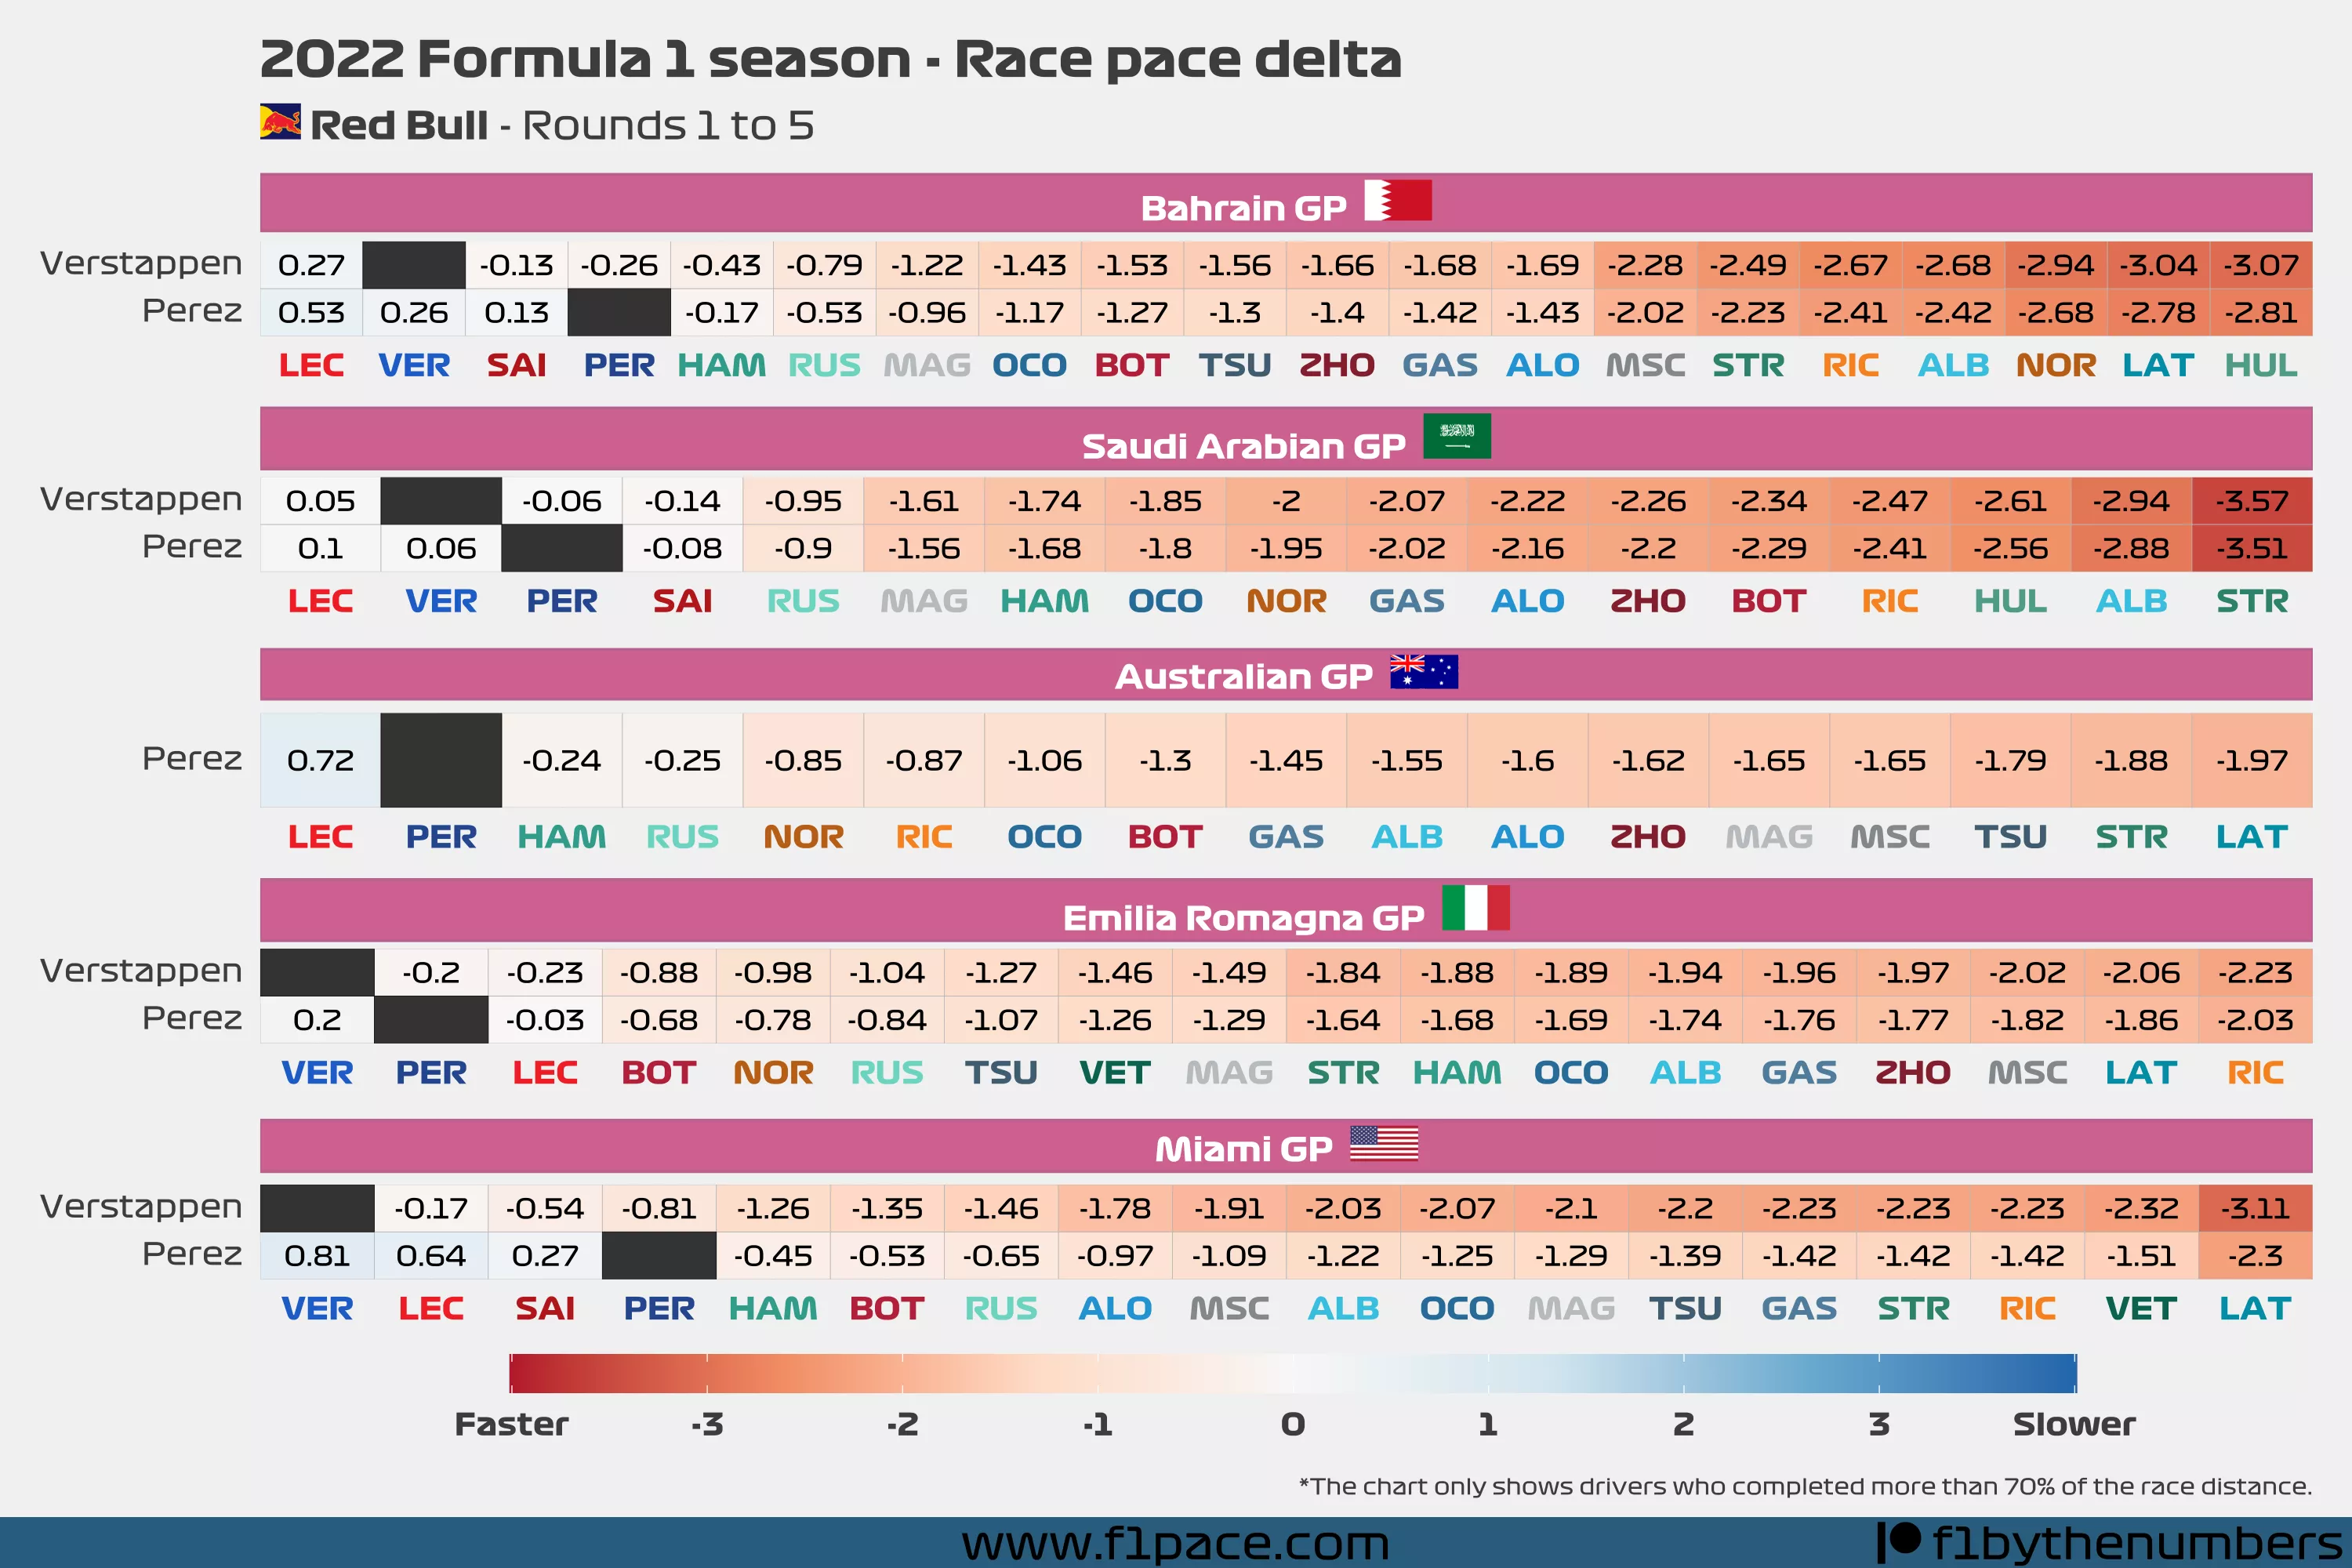 Race pace delta: Rounds to 1 to 5 - Red Bull